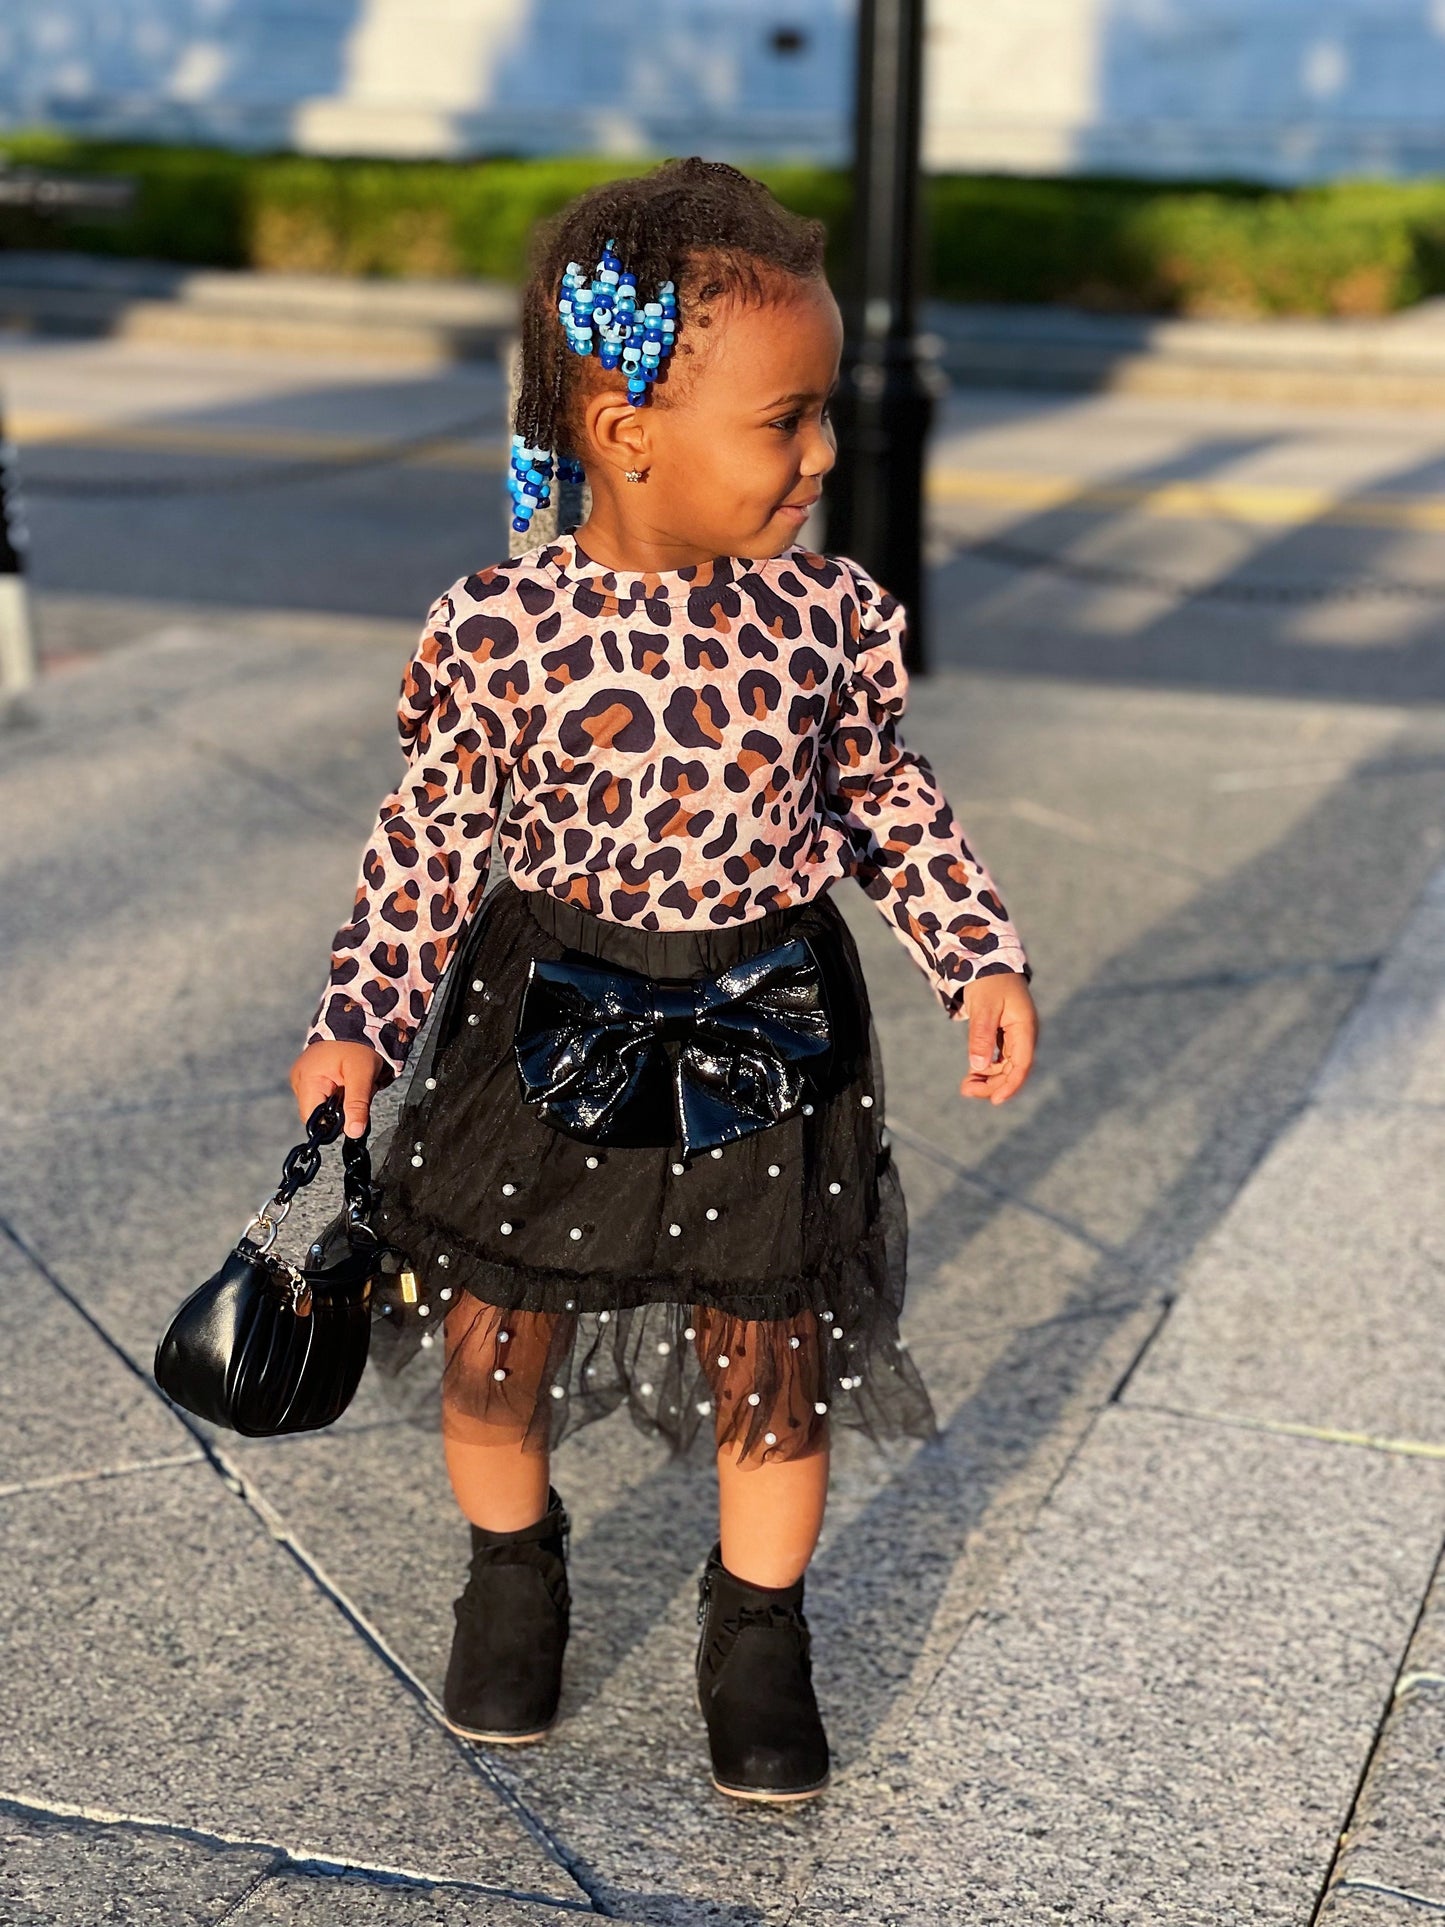 Leopard Print Baby Girl Clothes, The Cheetah Girl Set